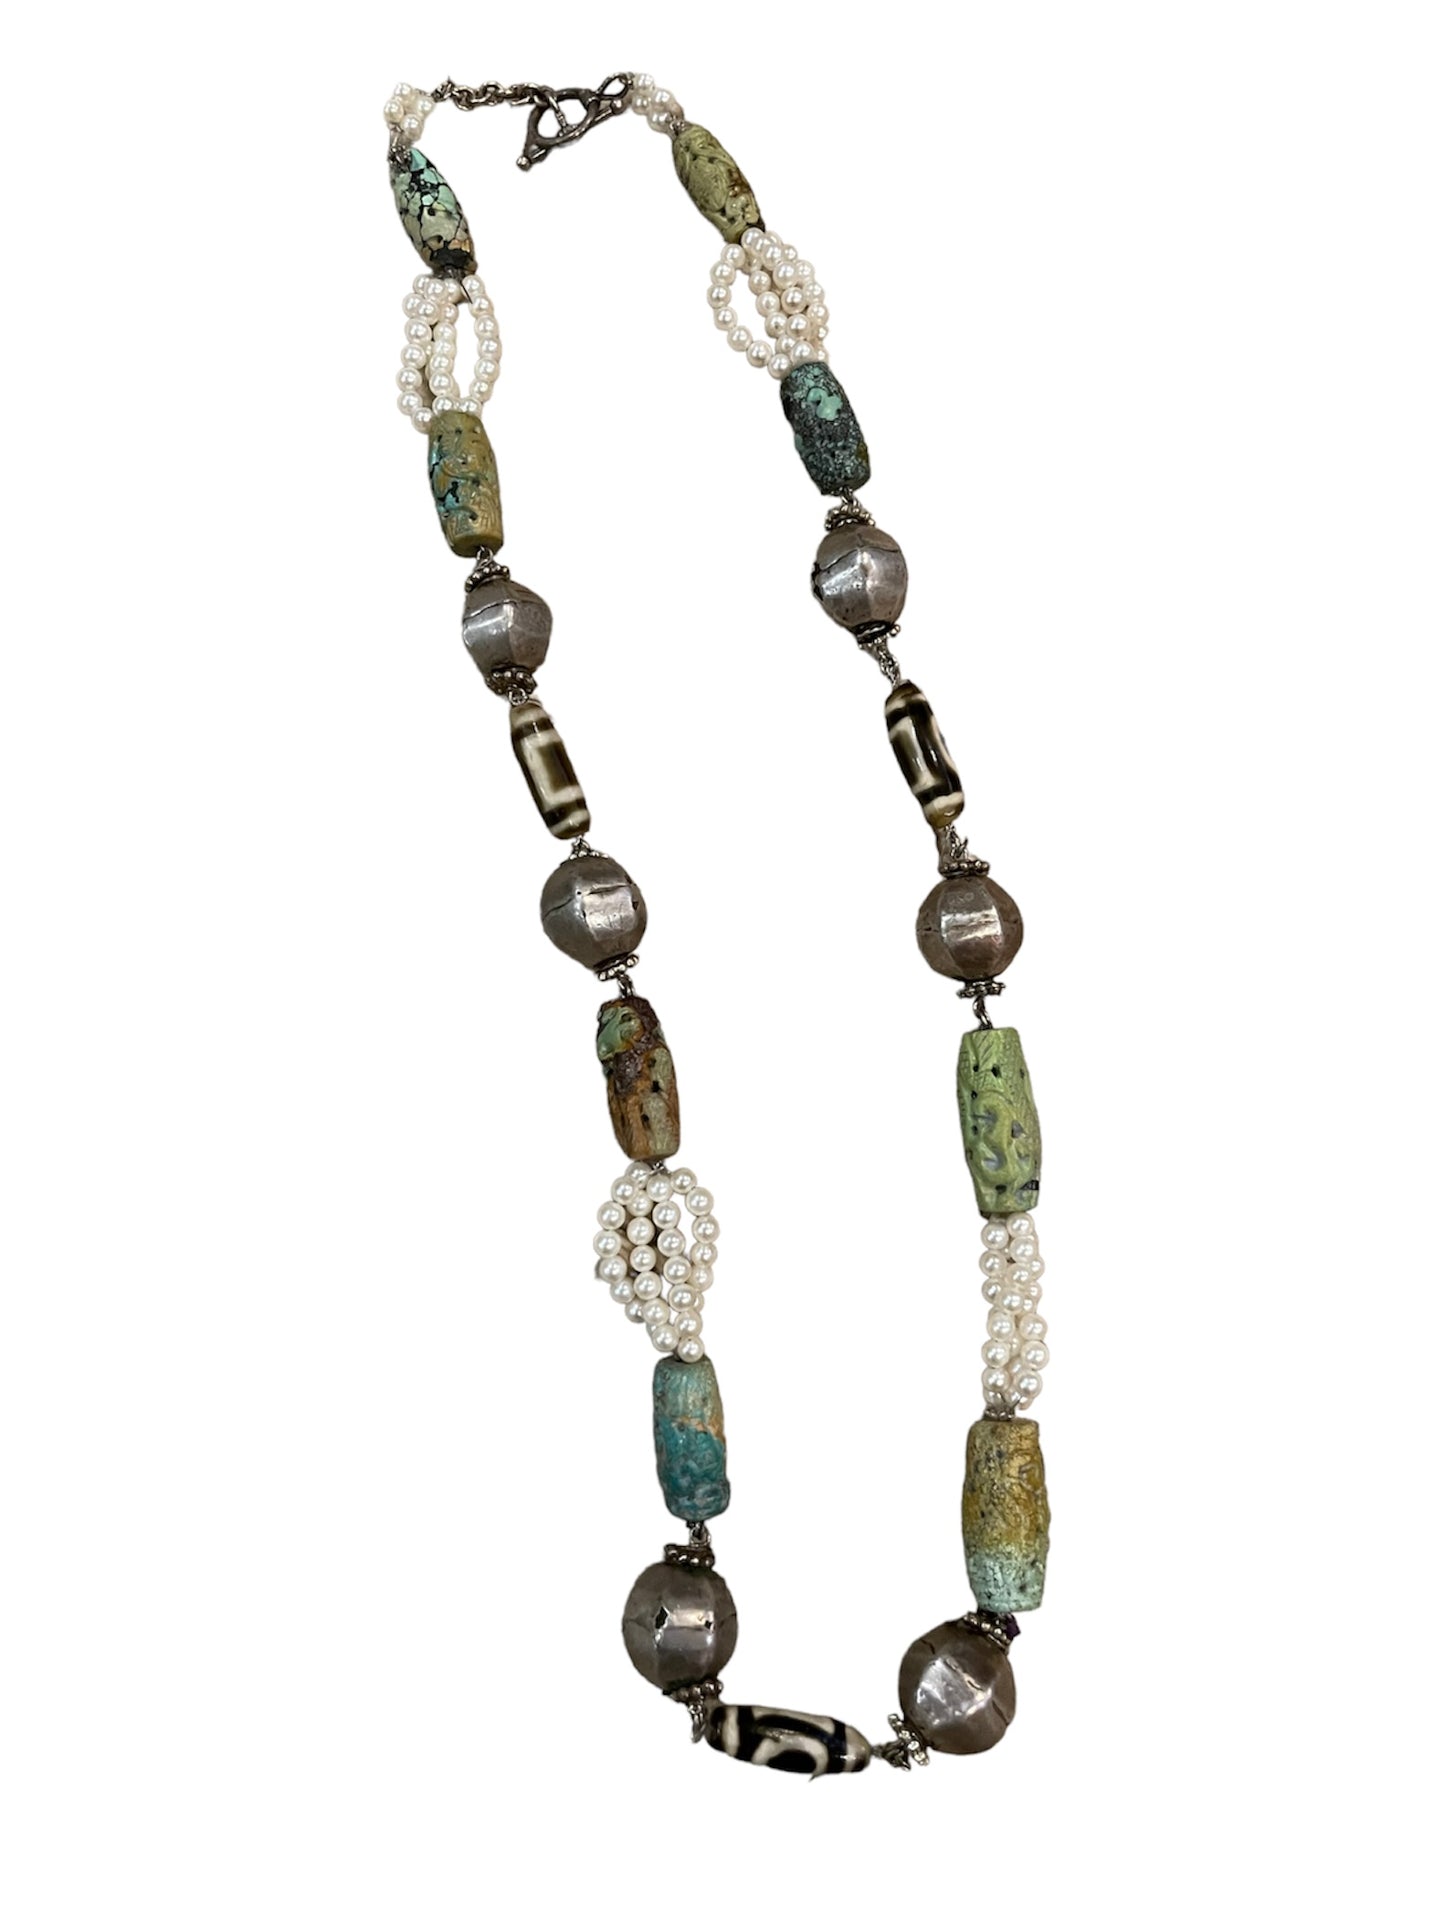 A necklace with antique turquoise, pearls and silver beads